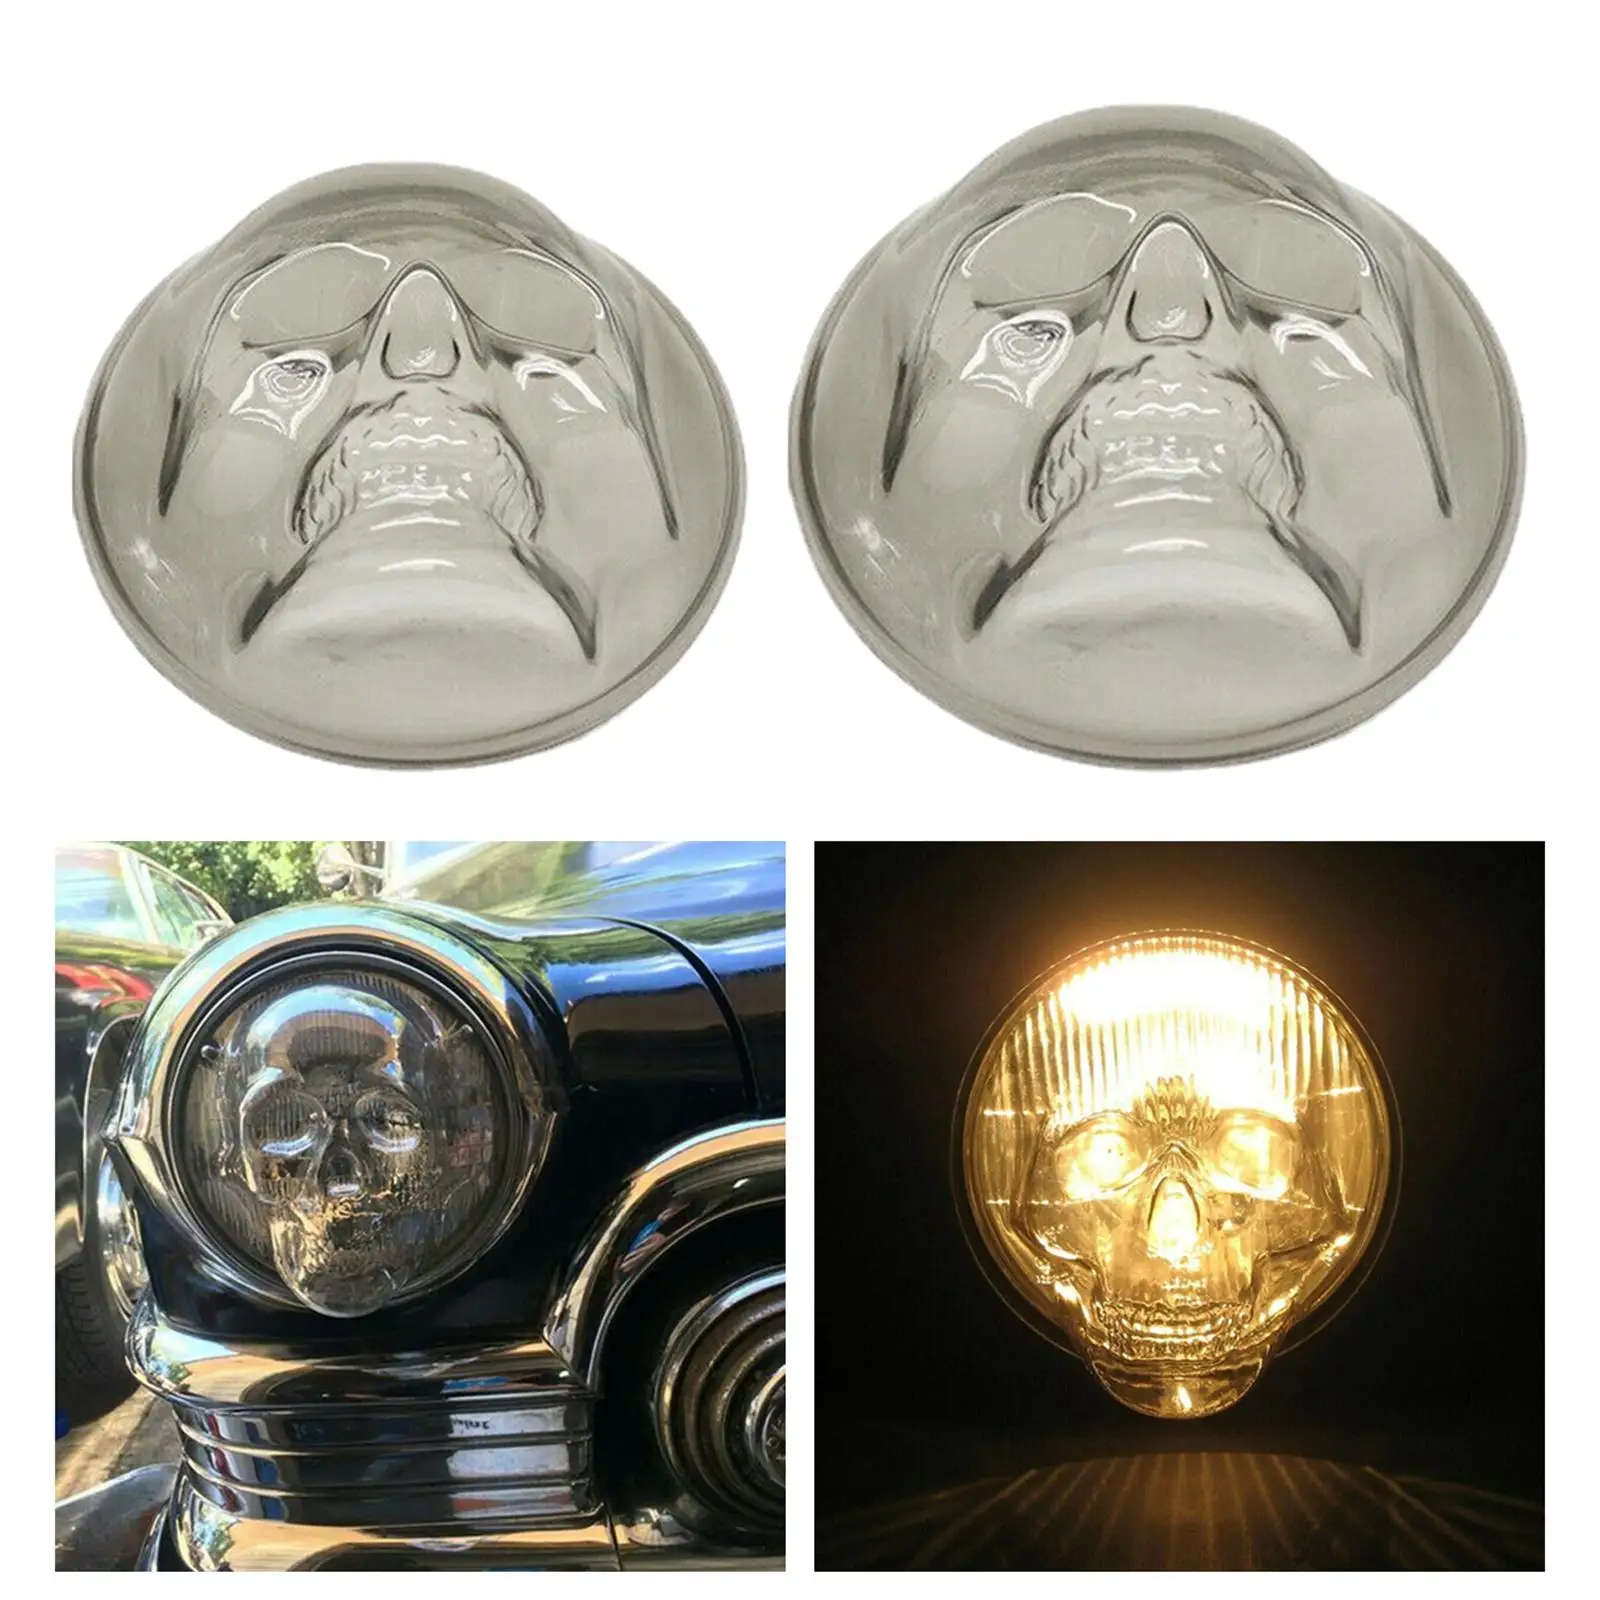 Vehicle Skull Headlight Covers PC Resin Material Easy to Install Auto Decorative Lamp Covers Parts Trim for Car Truck